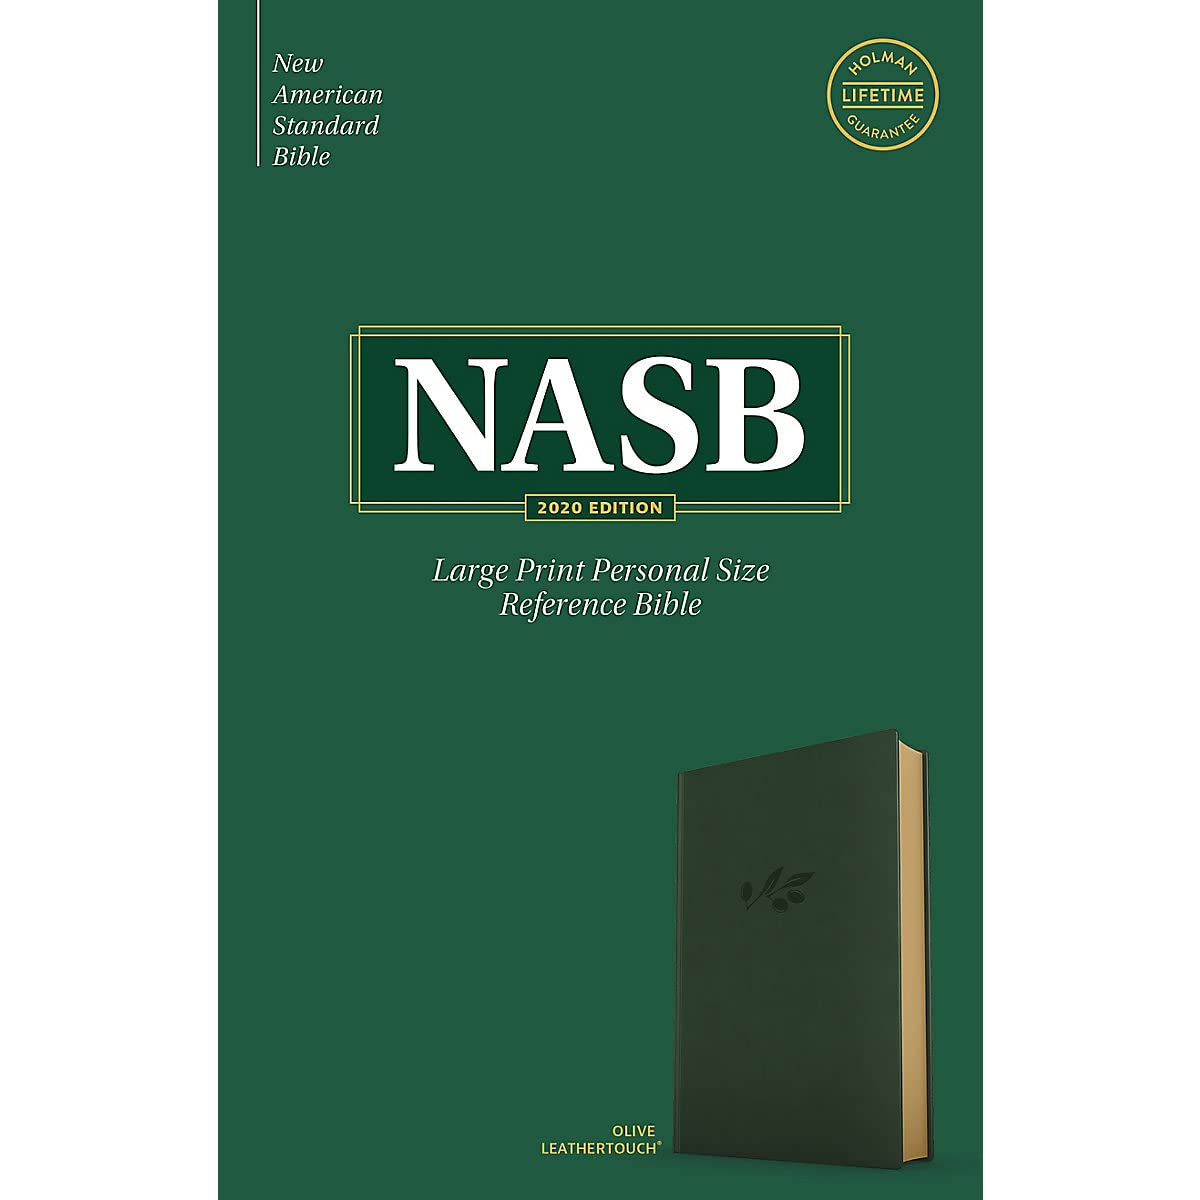 NASB Large Print Personal Size Reference Bible, Olive LeatherTouch, Red Letter, Presentation Page, Cross-References, Full-Color Maps, Easy-to-Read Bible Karmina Type